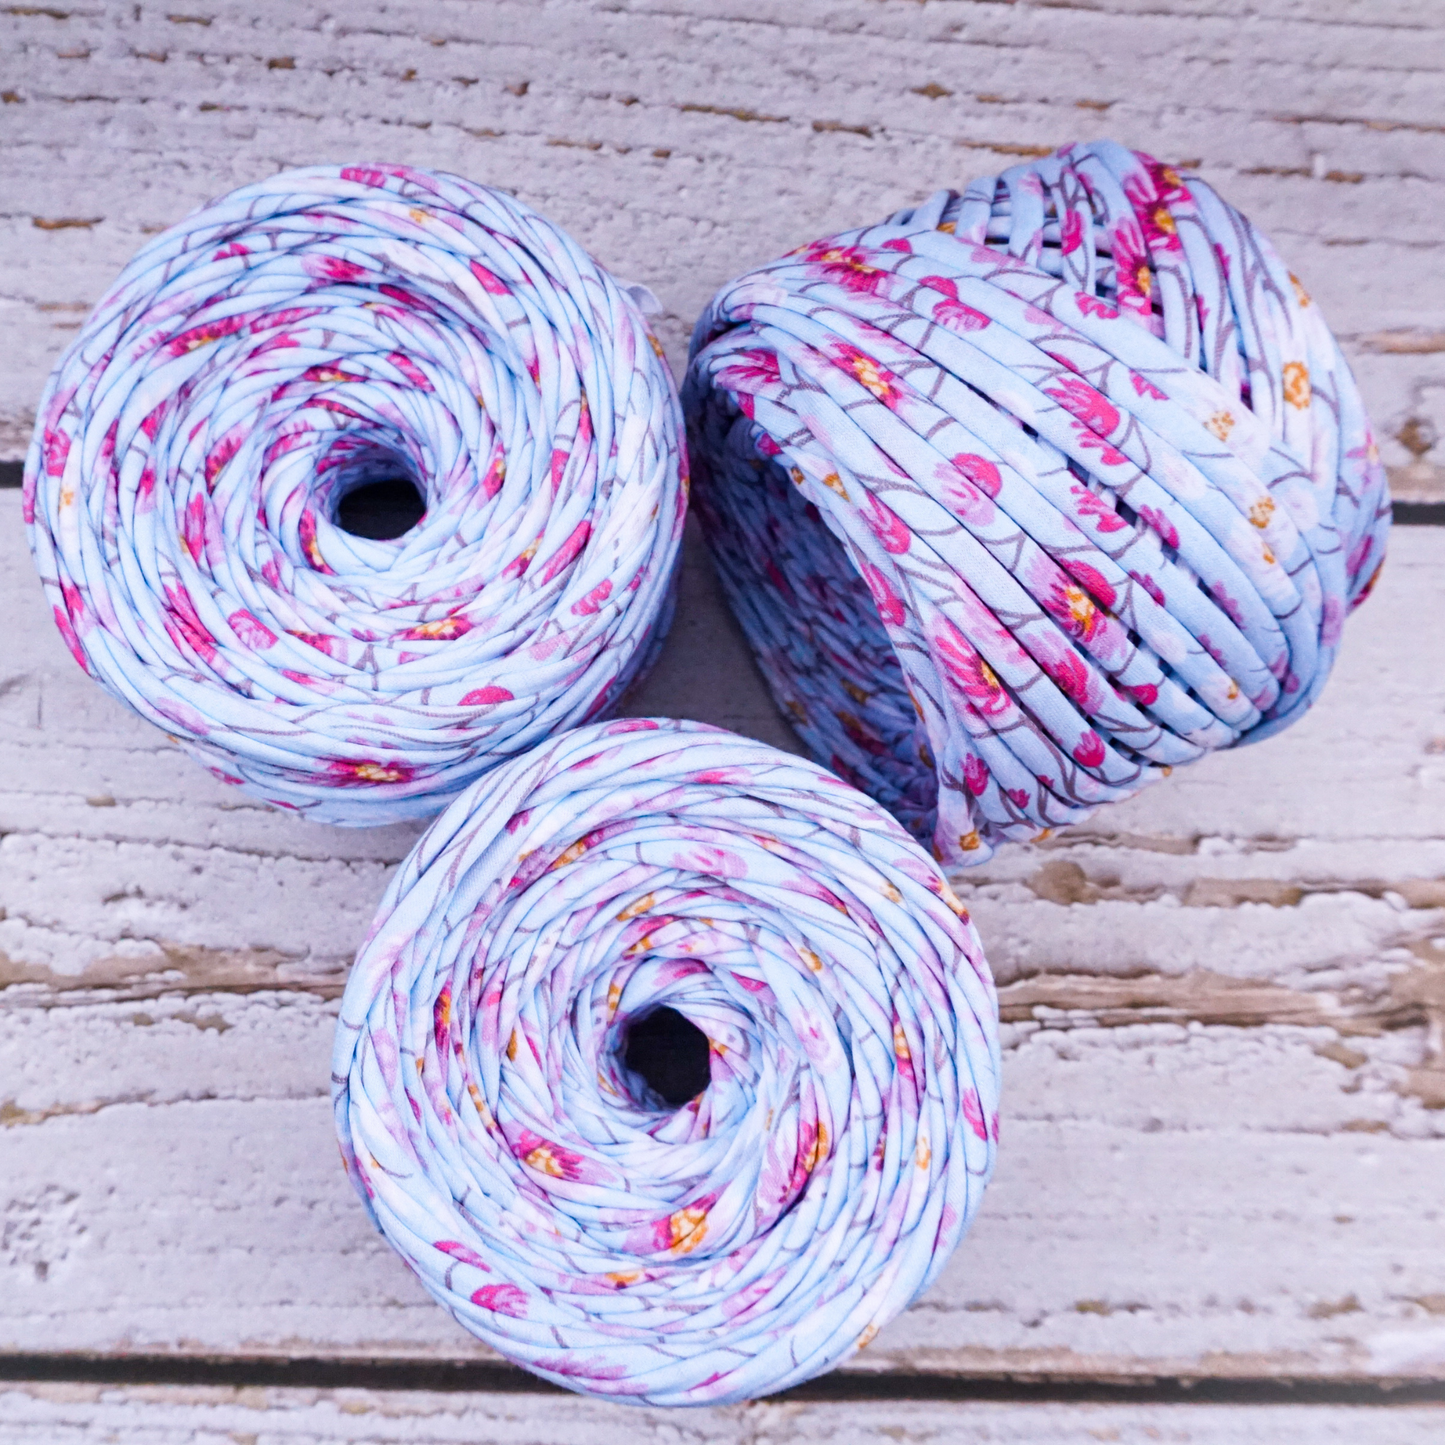 T-shirt yarn for crocheting baskets, bags, rugs and home decor. Flower print